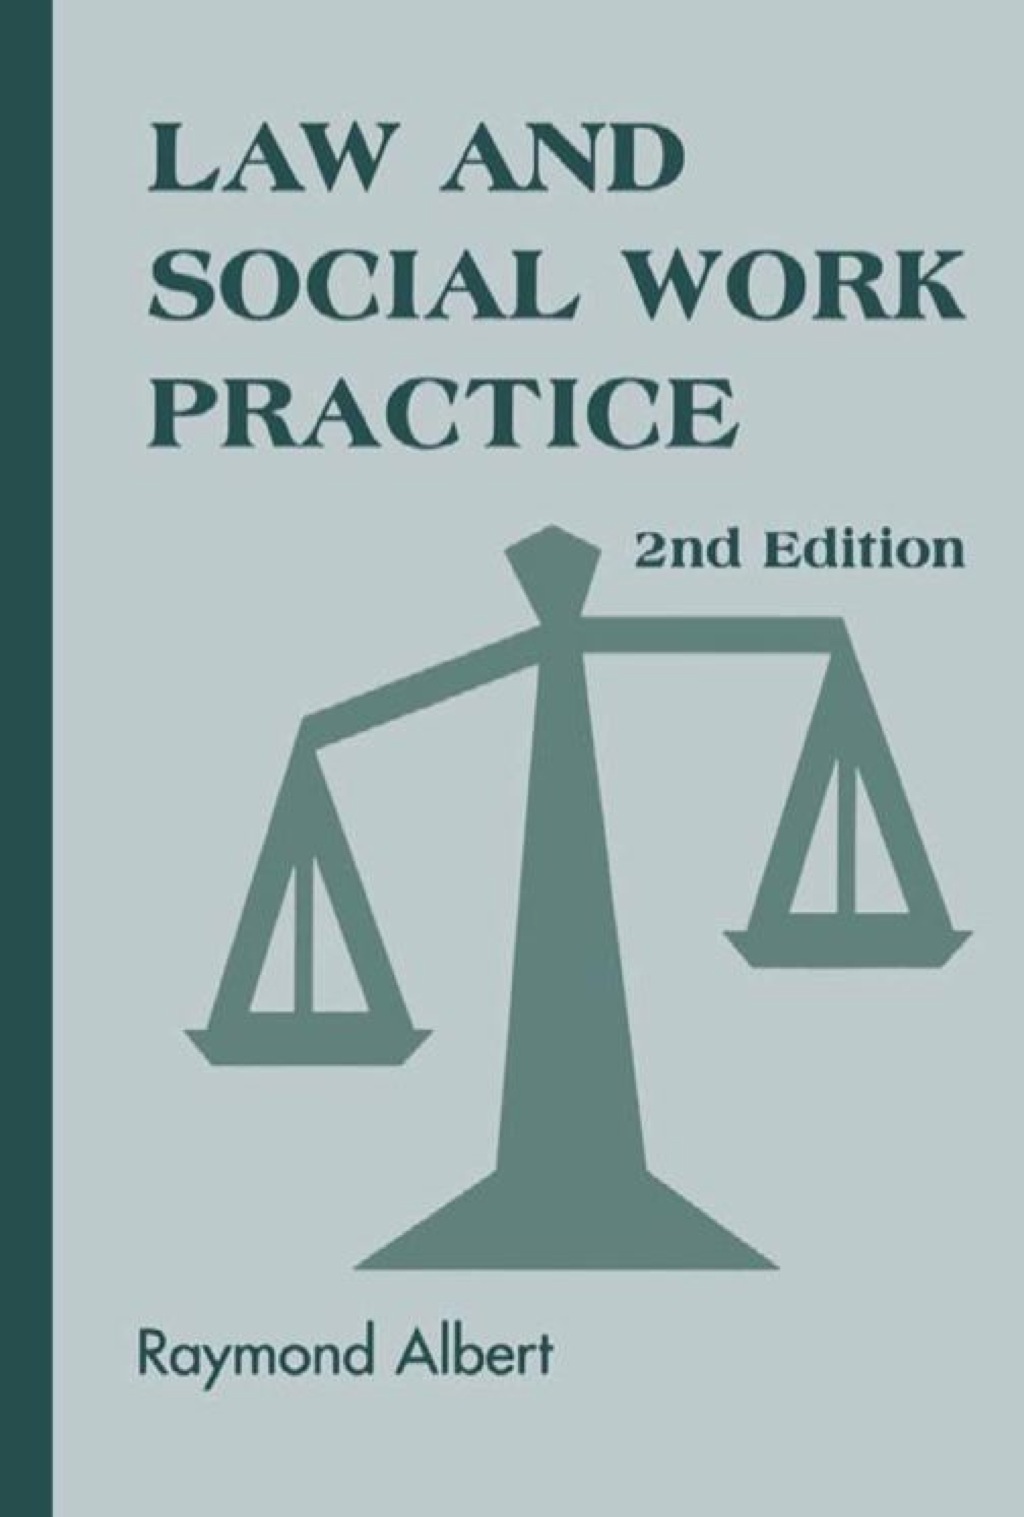 Law and Social Work Practice - 2nd Edition (eBook)